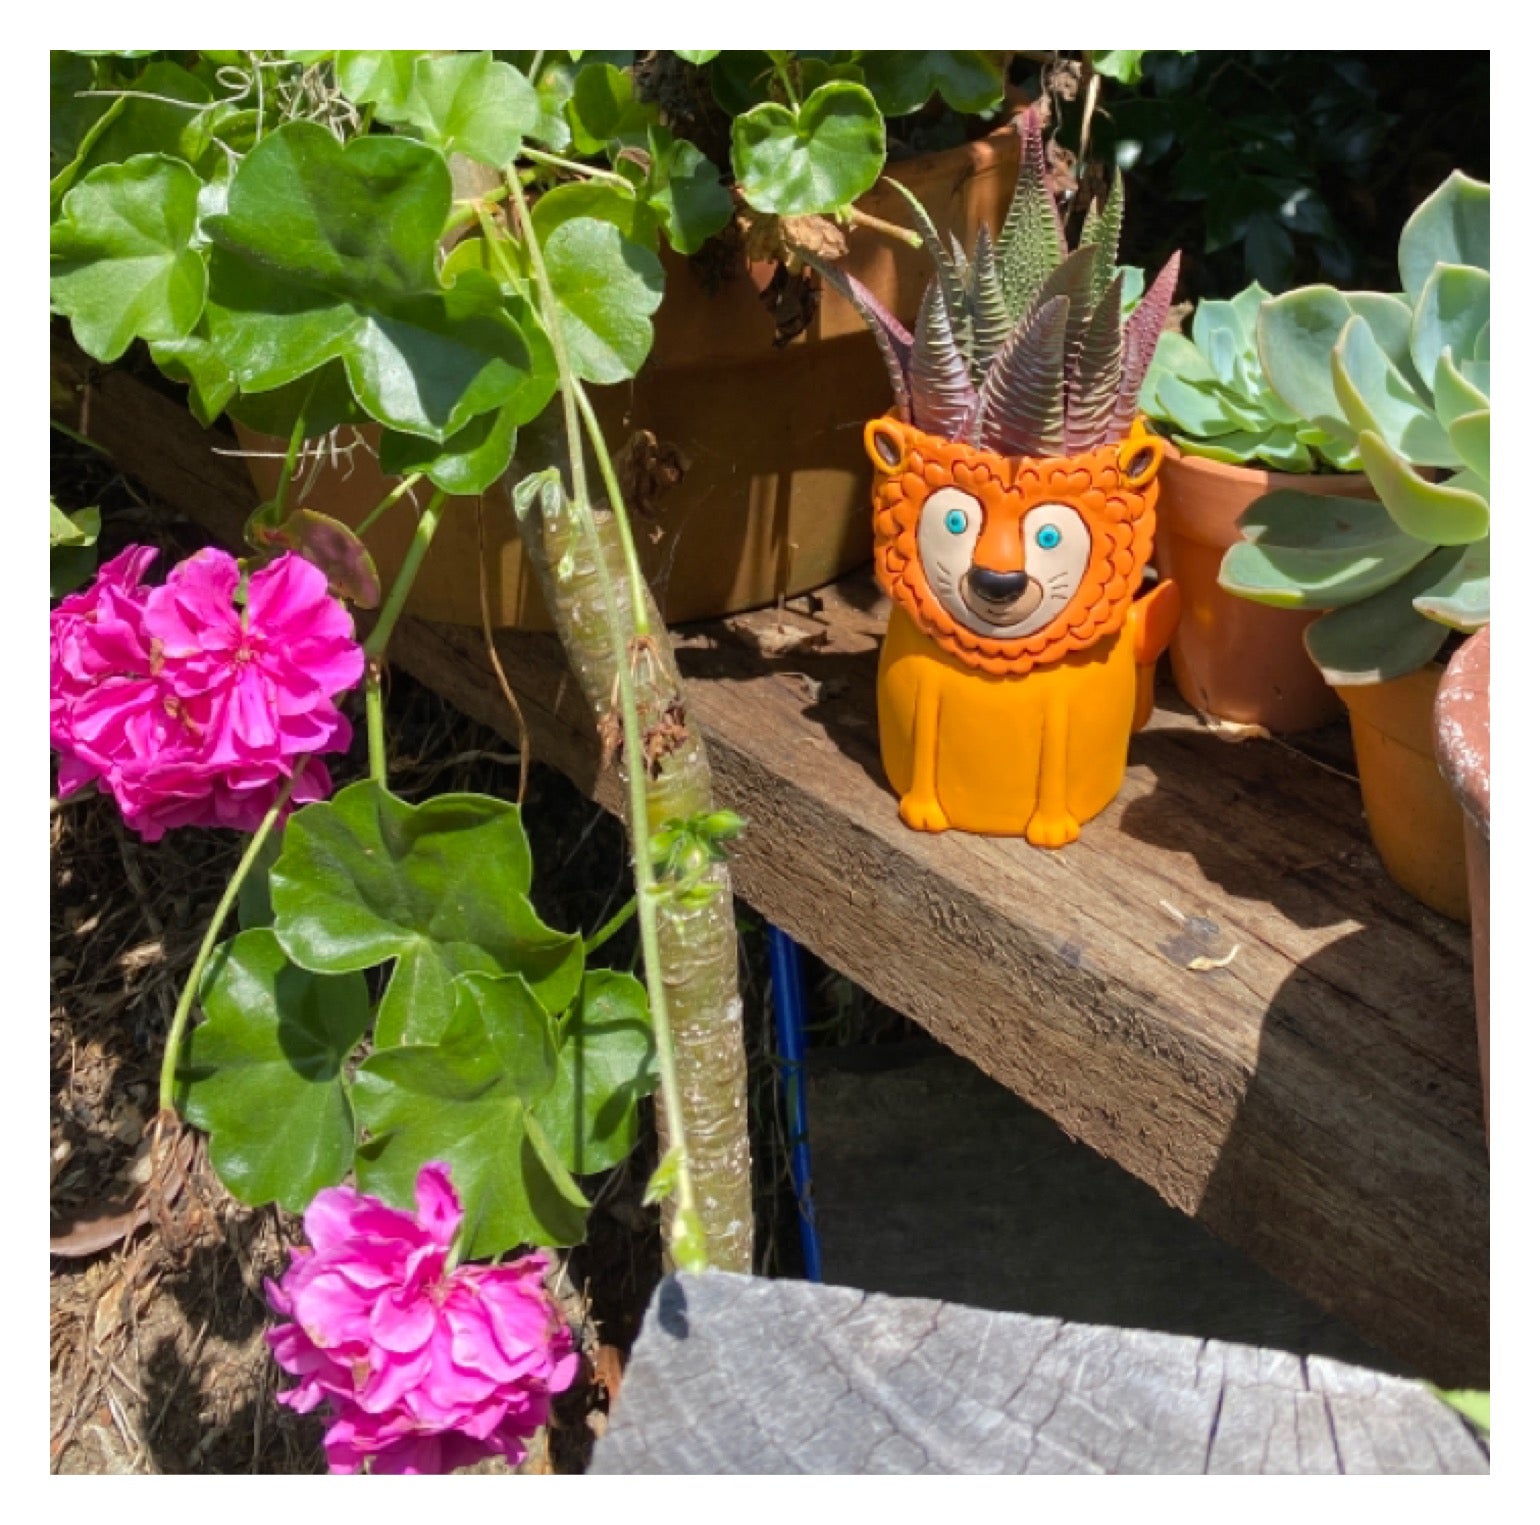 Lion Funky Pen Holder Pot Planter - The Renmy Store Homewares & Gifts 